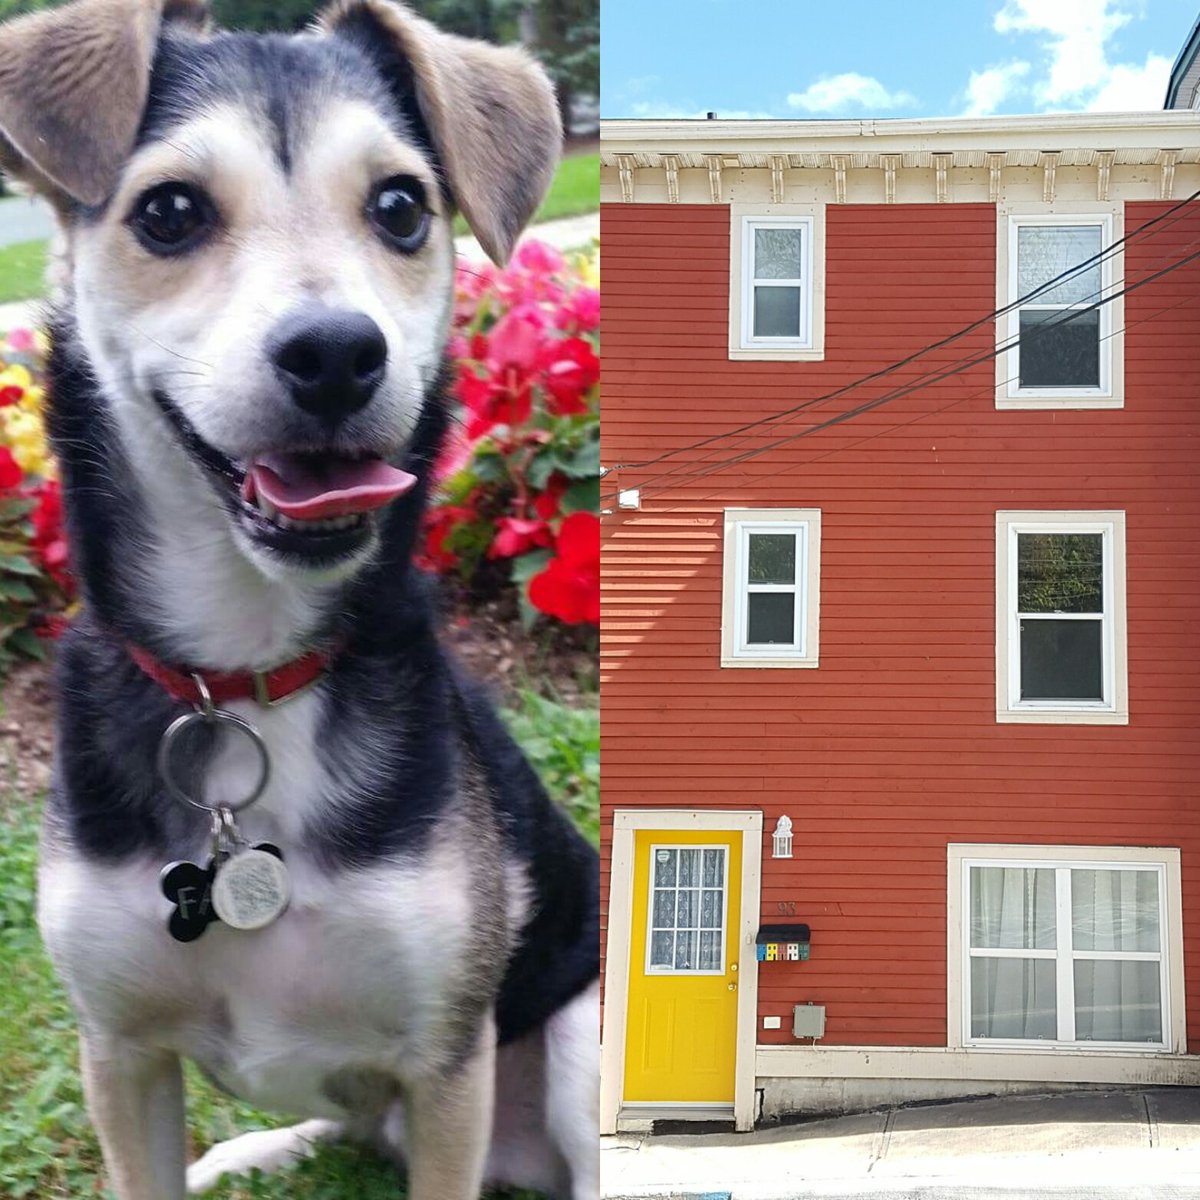 My name is Fasa. This is my house, but we moved and now we want to sell it.

Please buy my house. There's an open house on Sunday June 24th from 2-4 pm and this nice lady would be happy to sell it  to you. It's at 93 Pleasant St. #BuyThisHouse #OpenHouse #MLS1175608